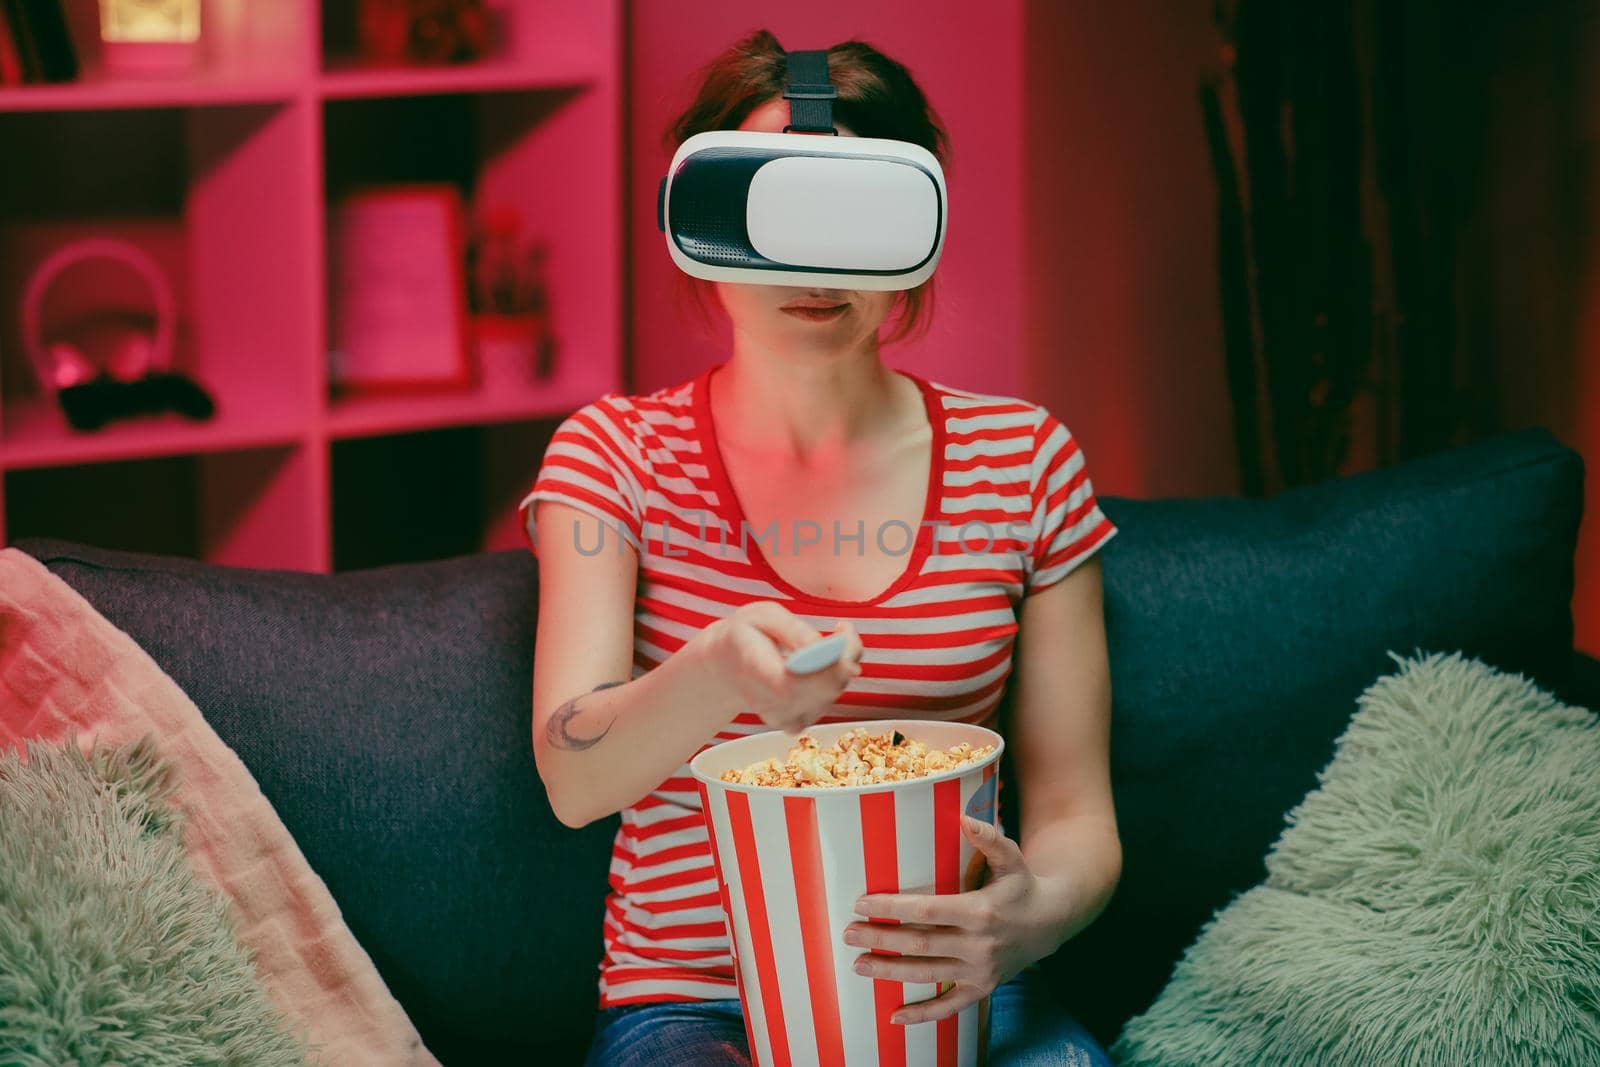 Portrait of the young woman sitting on the couch and having the VR headset, watching something while eating popcorn and smiling. Indoors